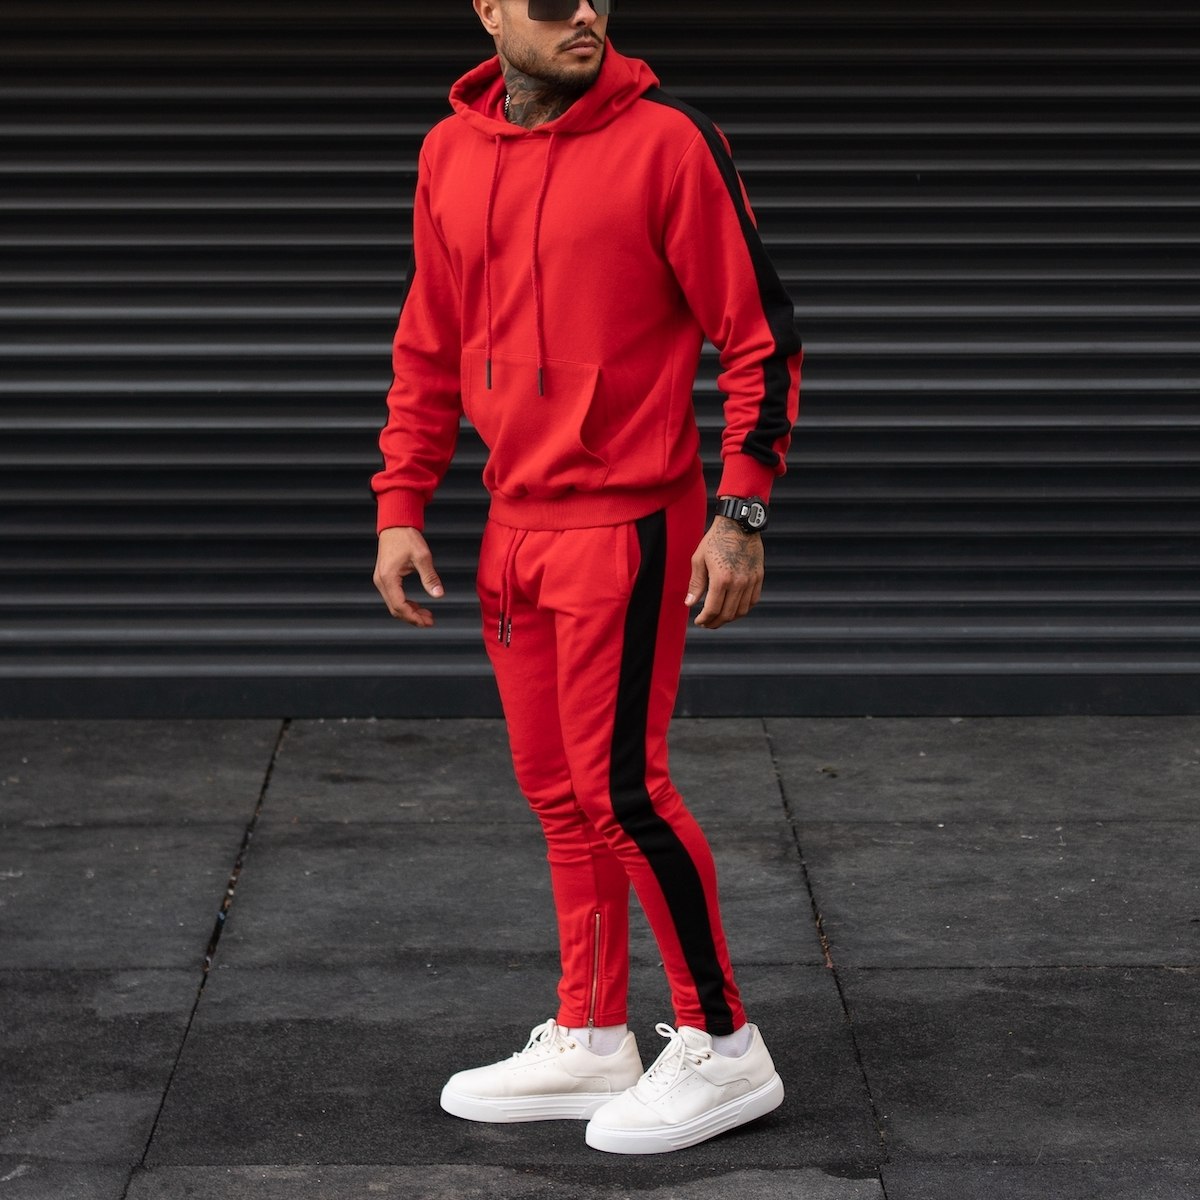 Men's Black-Stripped Red Tracksuit - 2